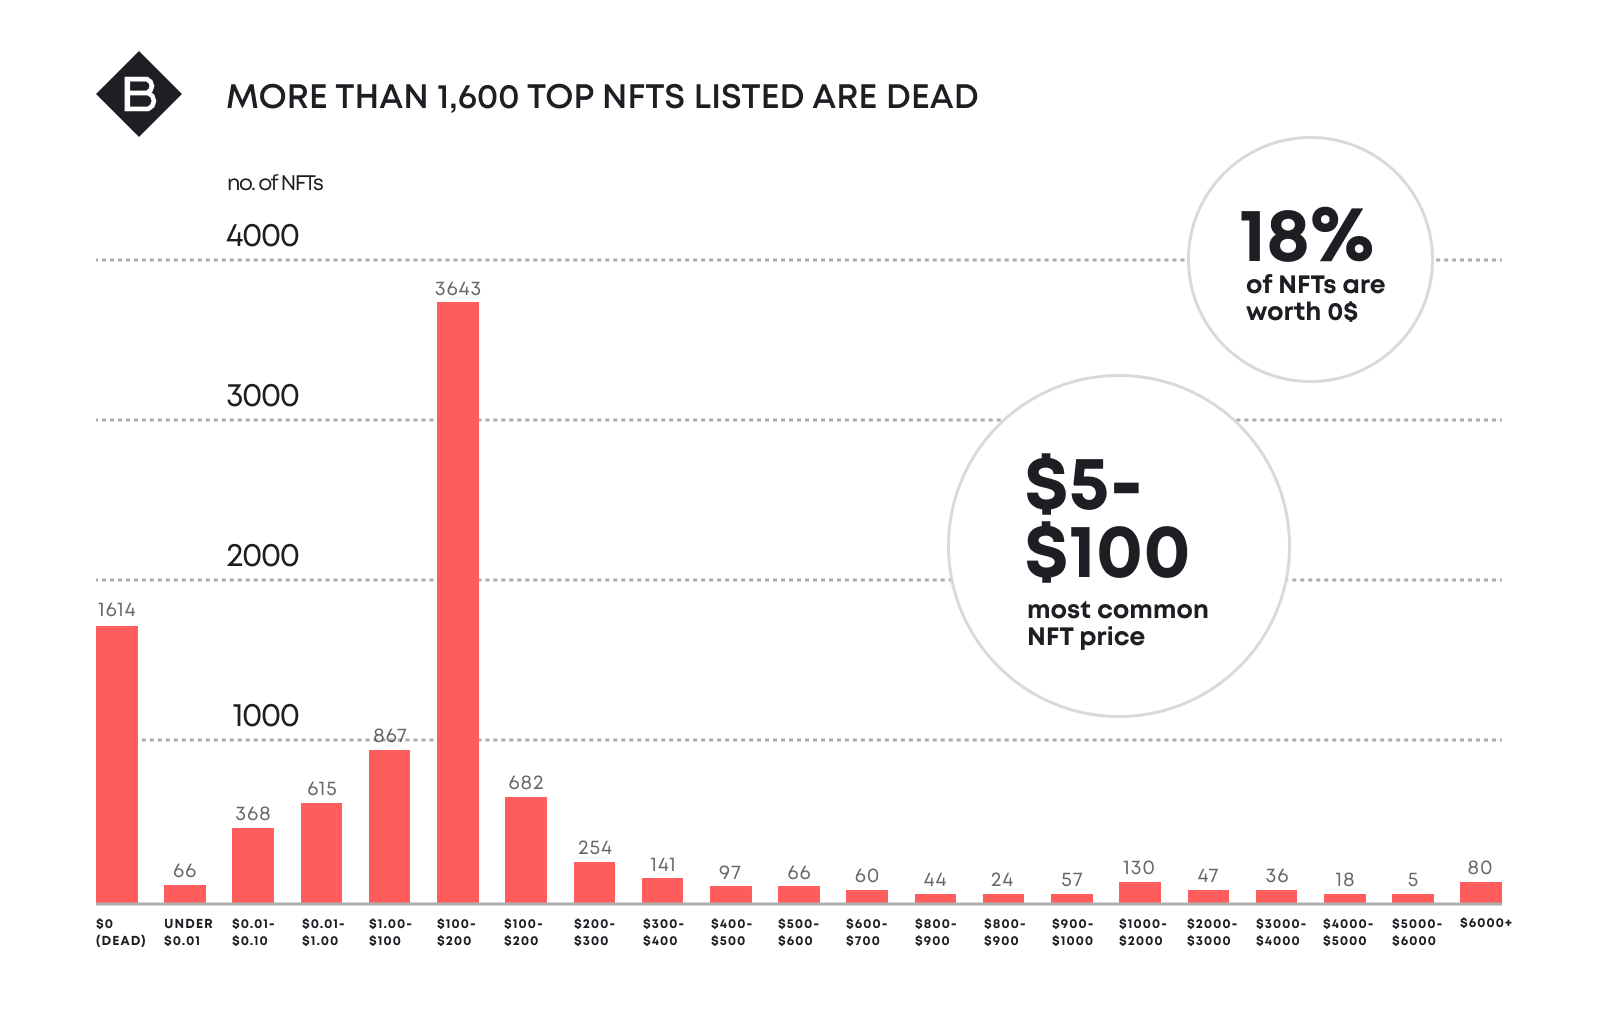 Approximately 23 million individuals possess NFT, which currently hold no monetary value in the market.